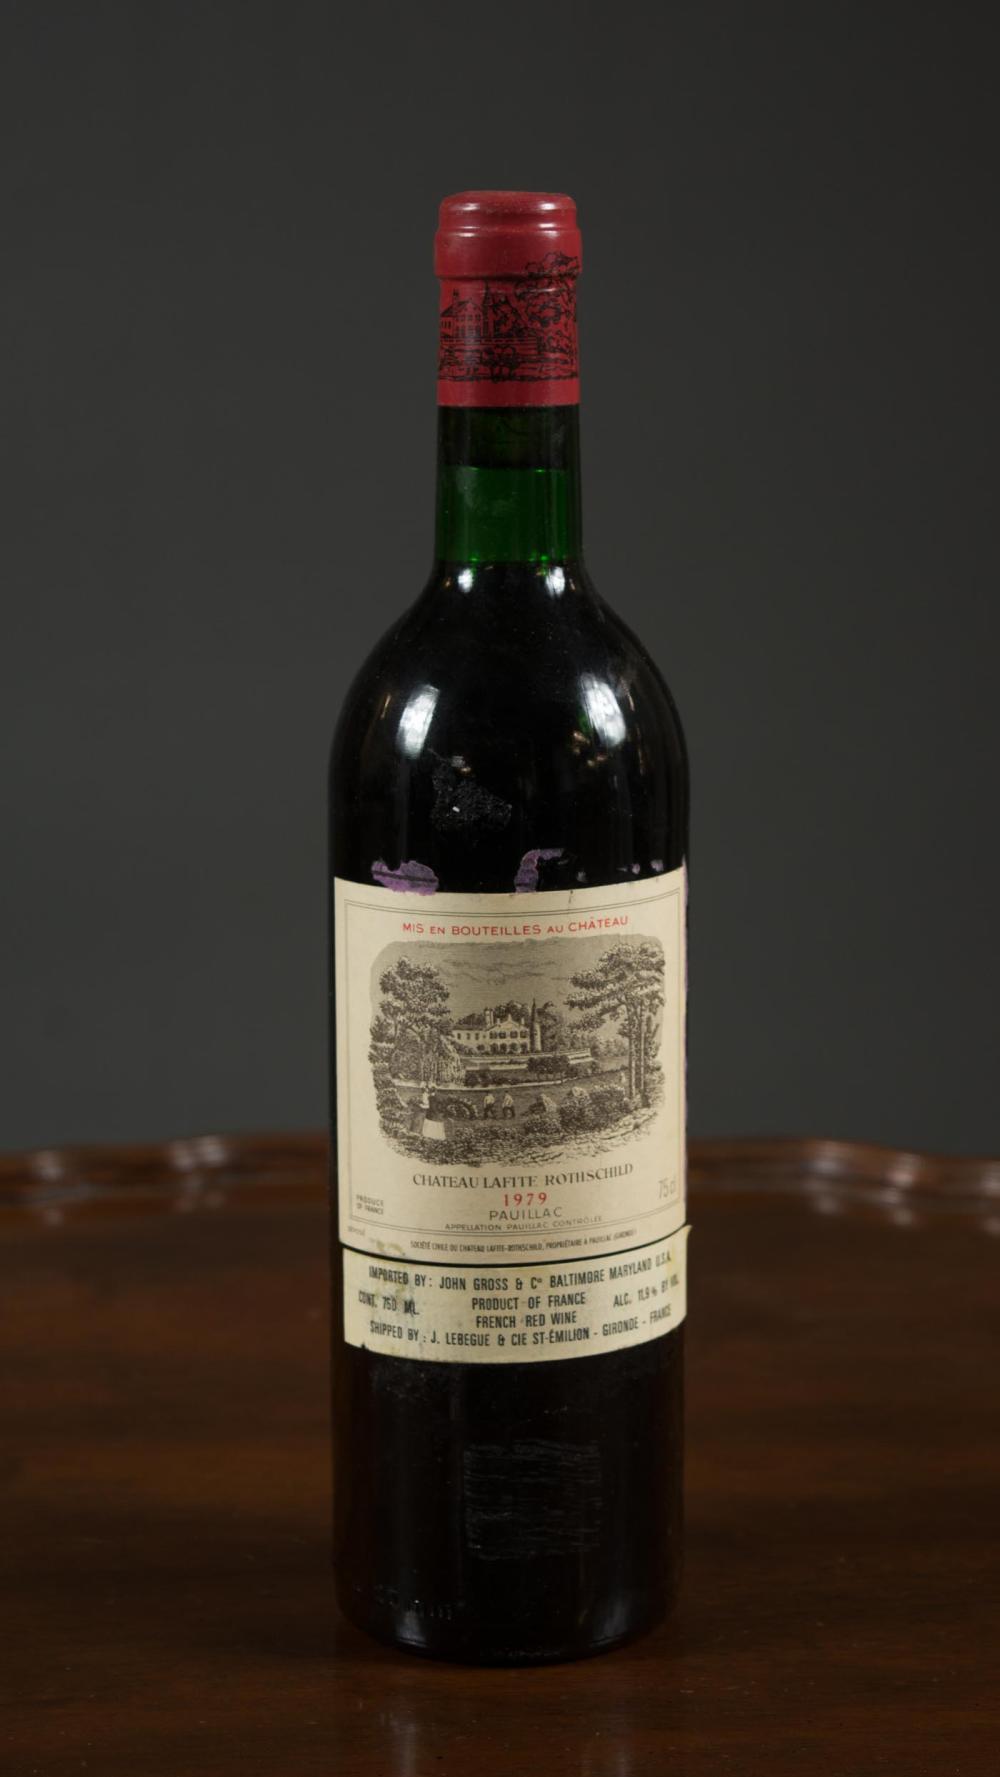 SINGLE BOTTLE OF FRENCH RED BORDEAUX 30a3a0